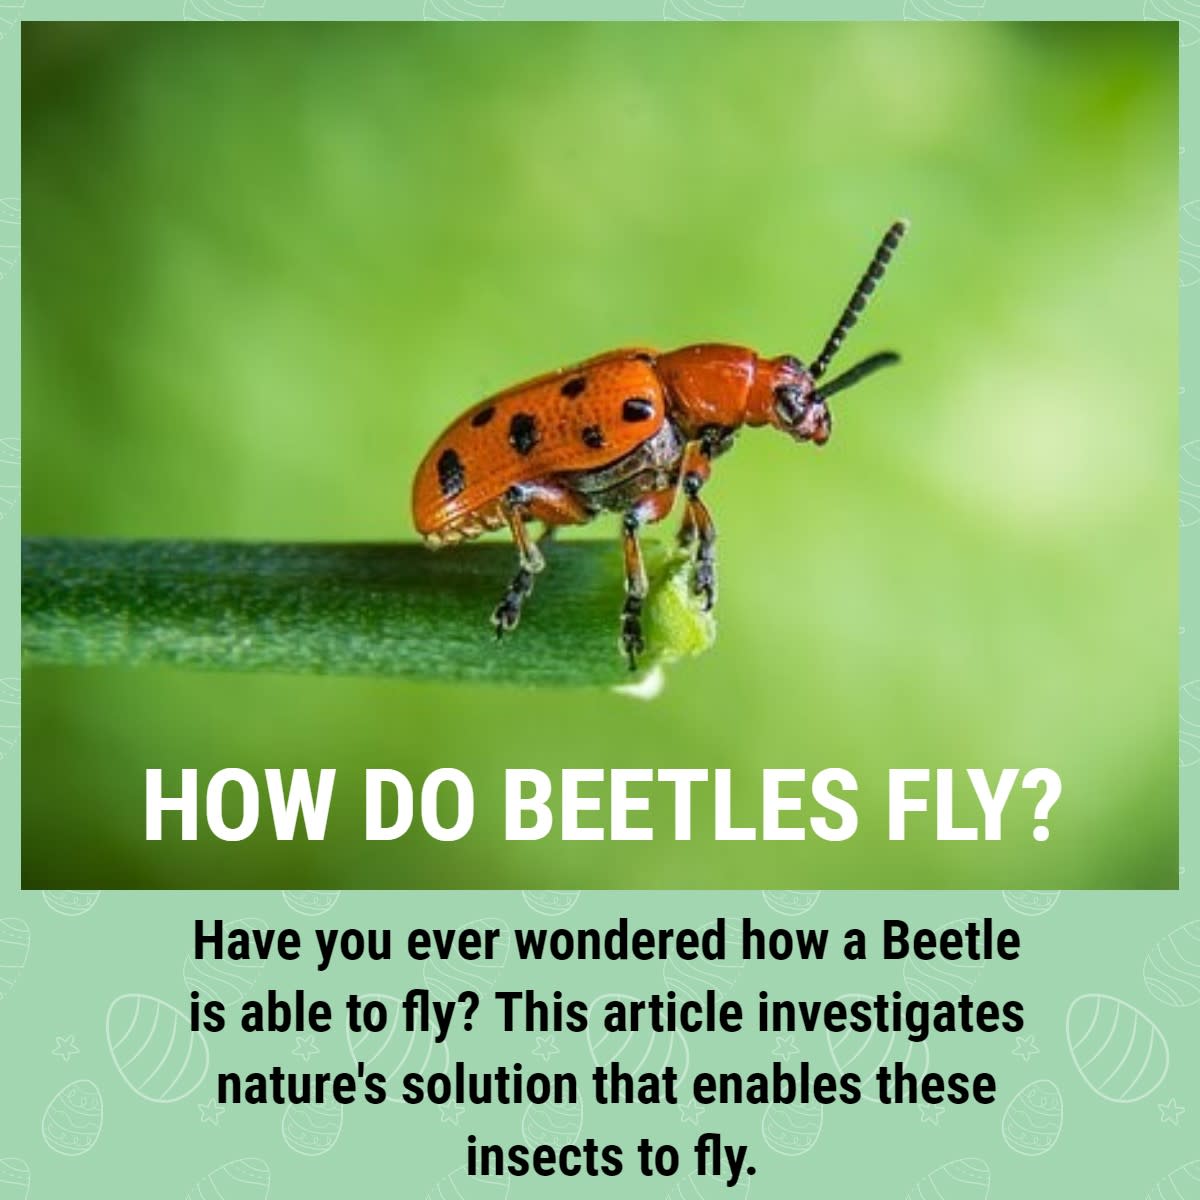 How Do Beetles Fly?